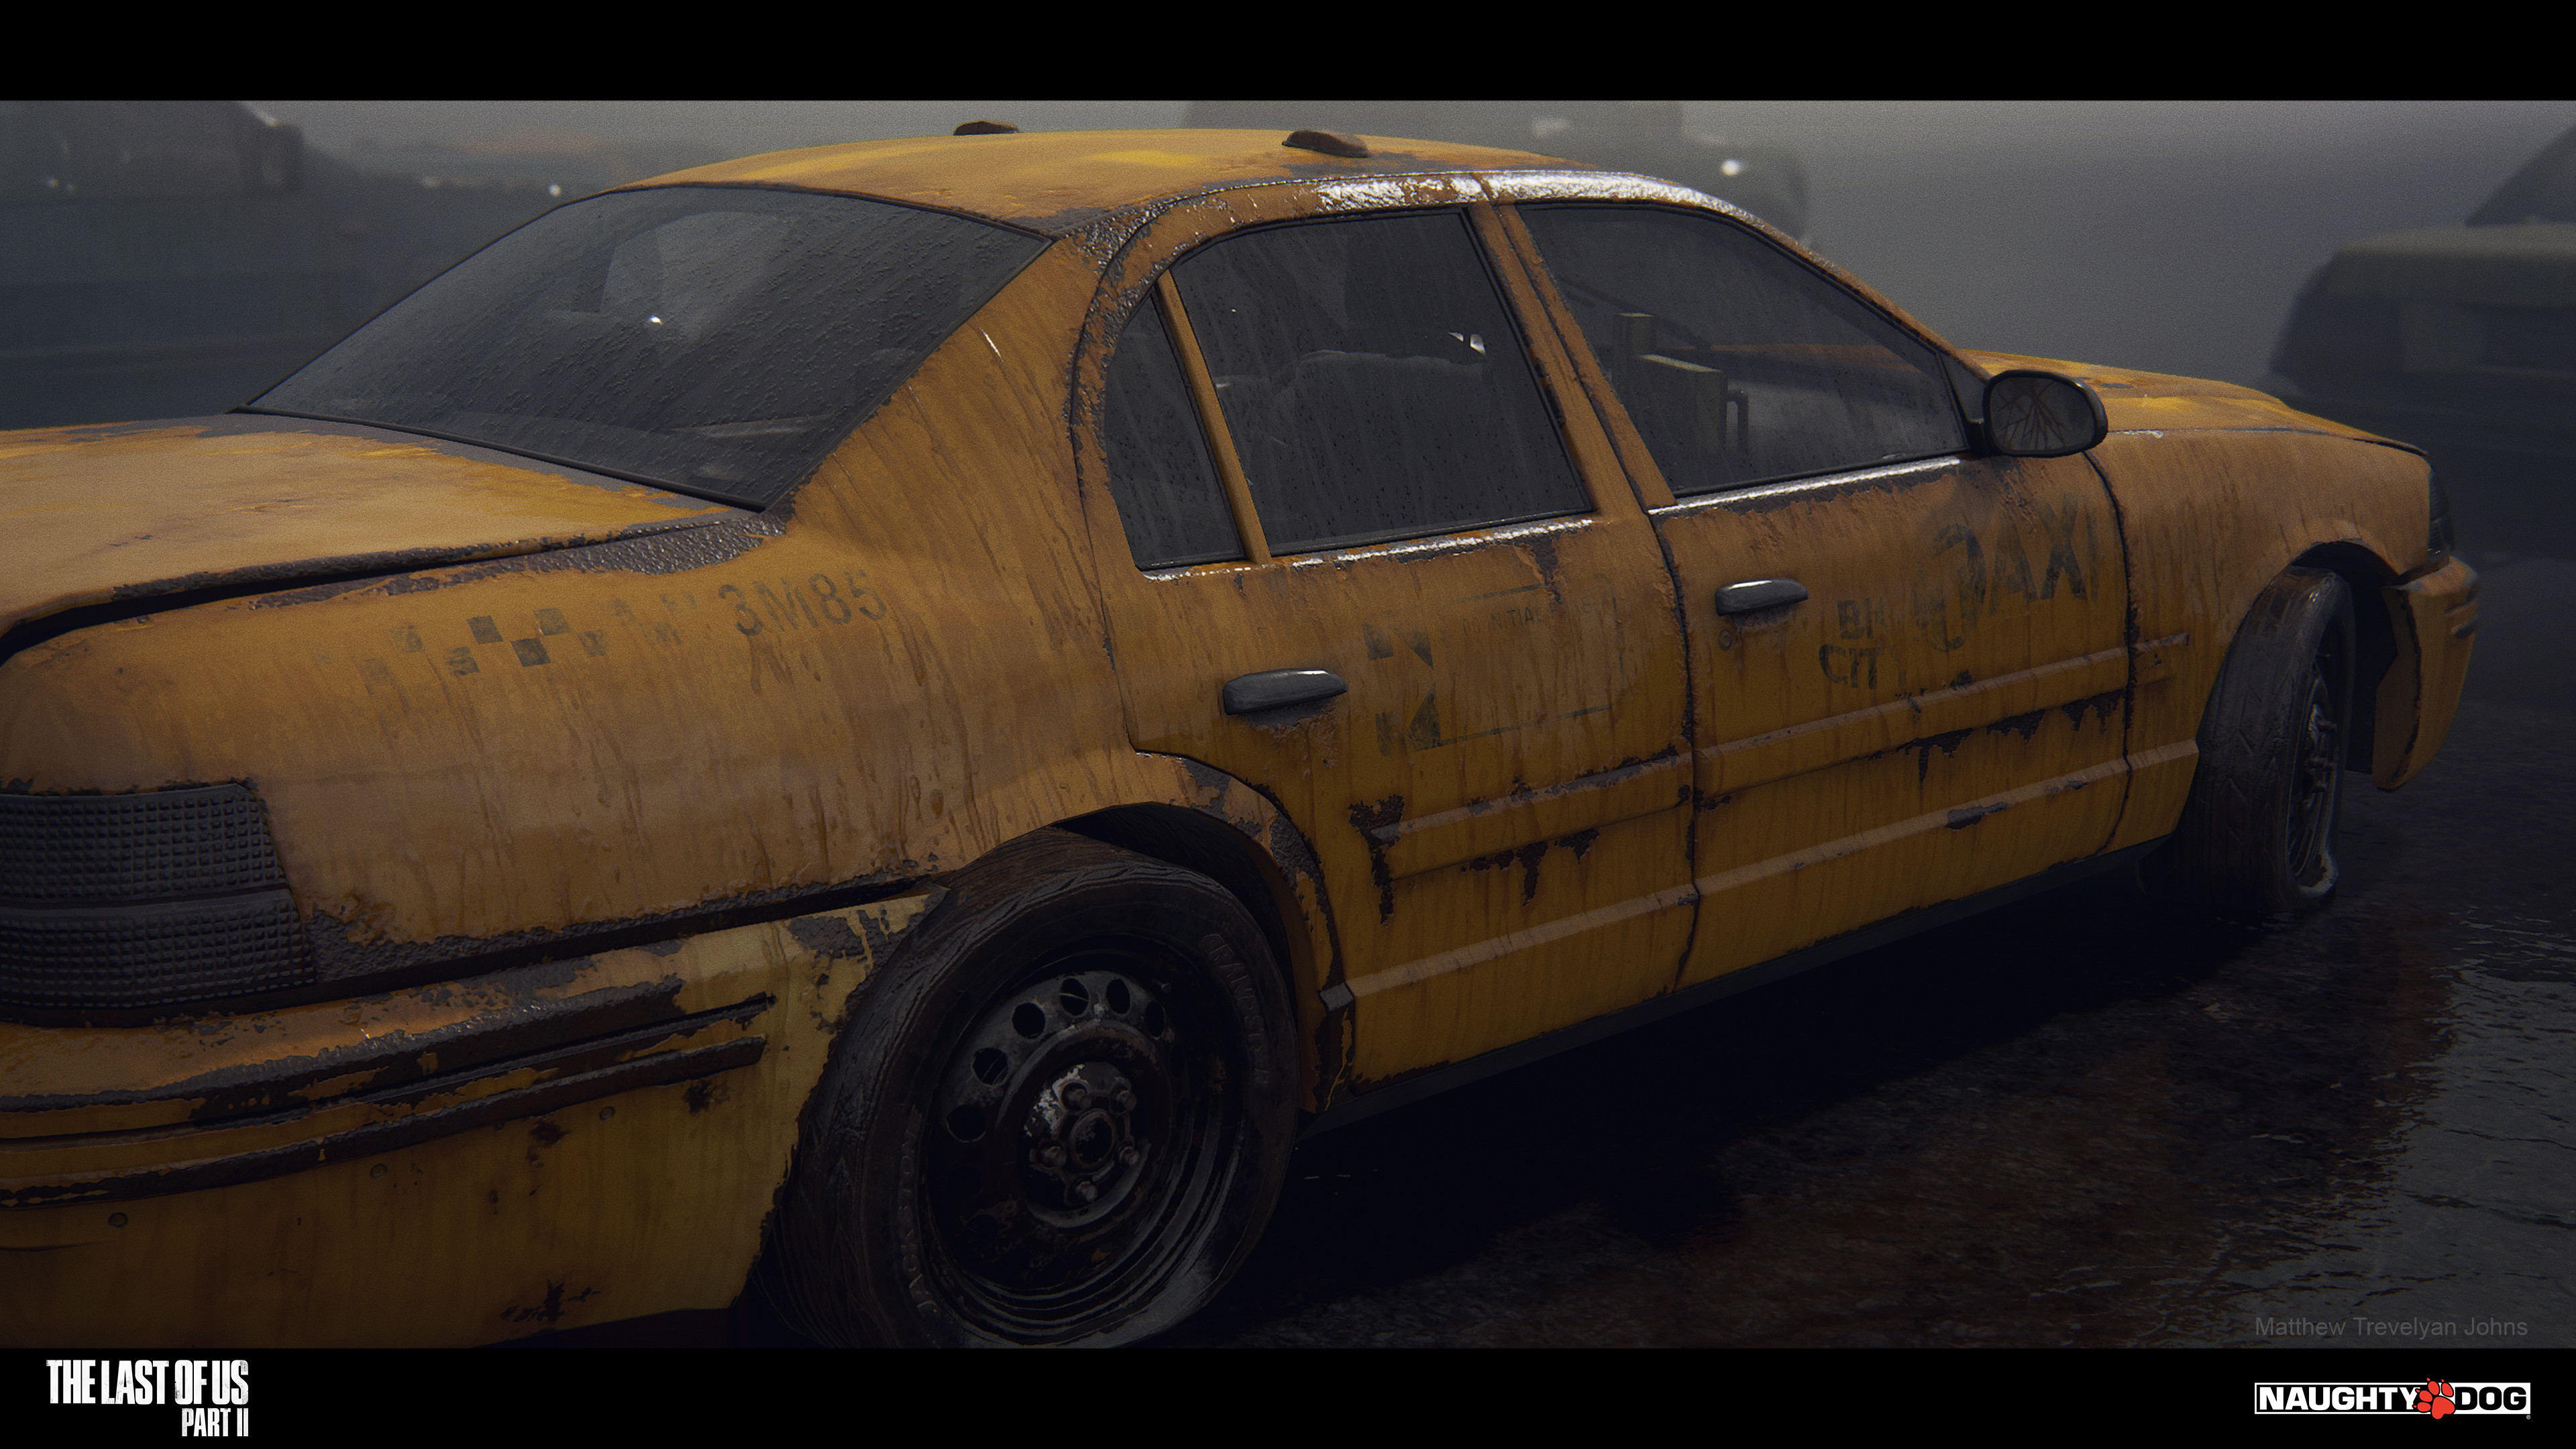 It wasn't just the bodies that received the wetness treatment, but windows, hubcaps, tires, undercarriages, engines all had shaders that reacted to wetness and rain consistently